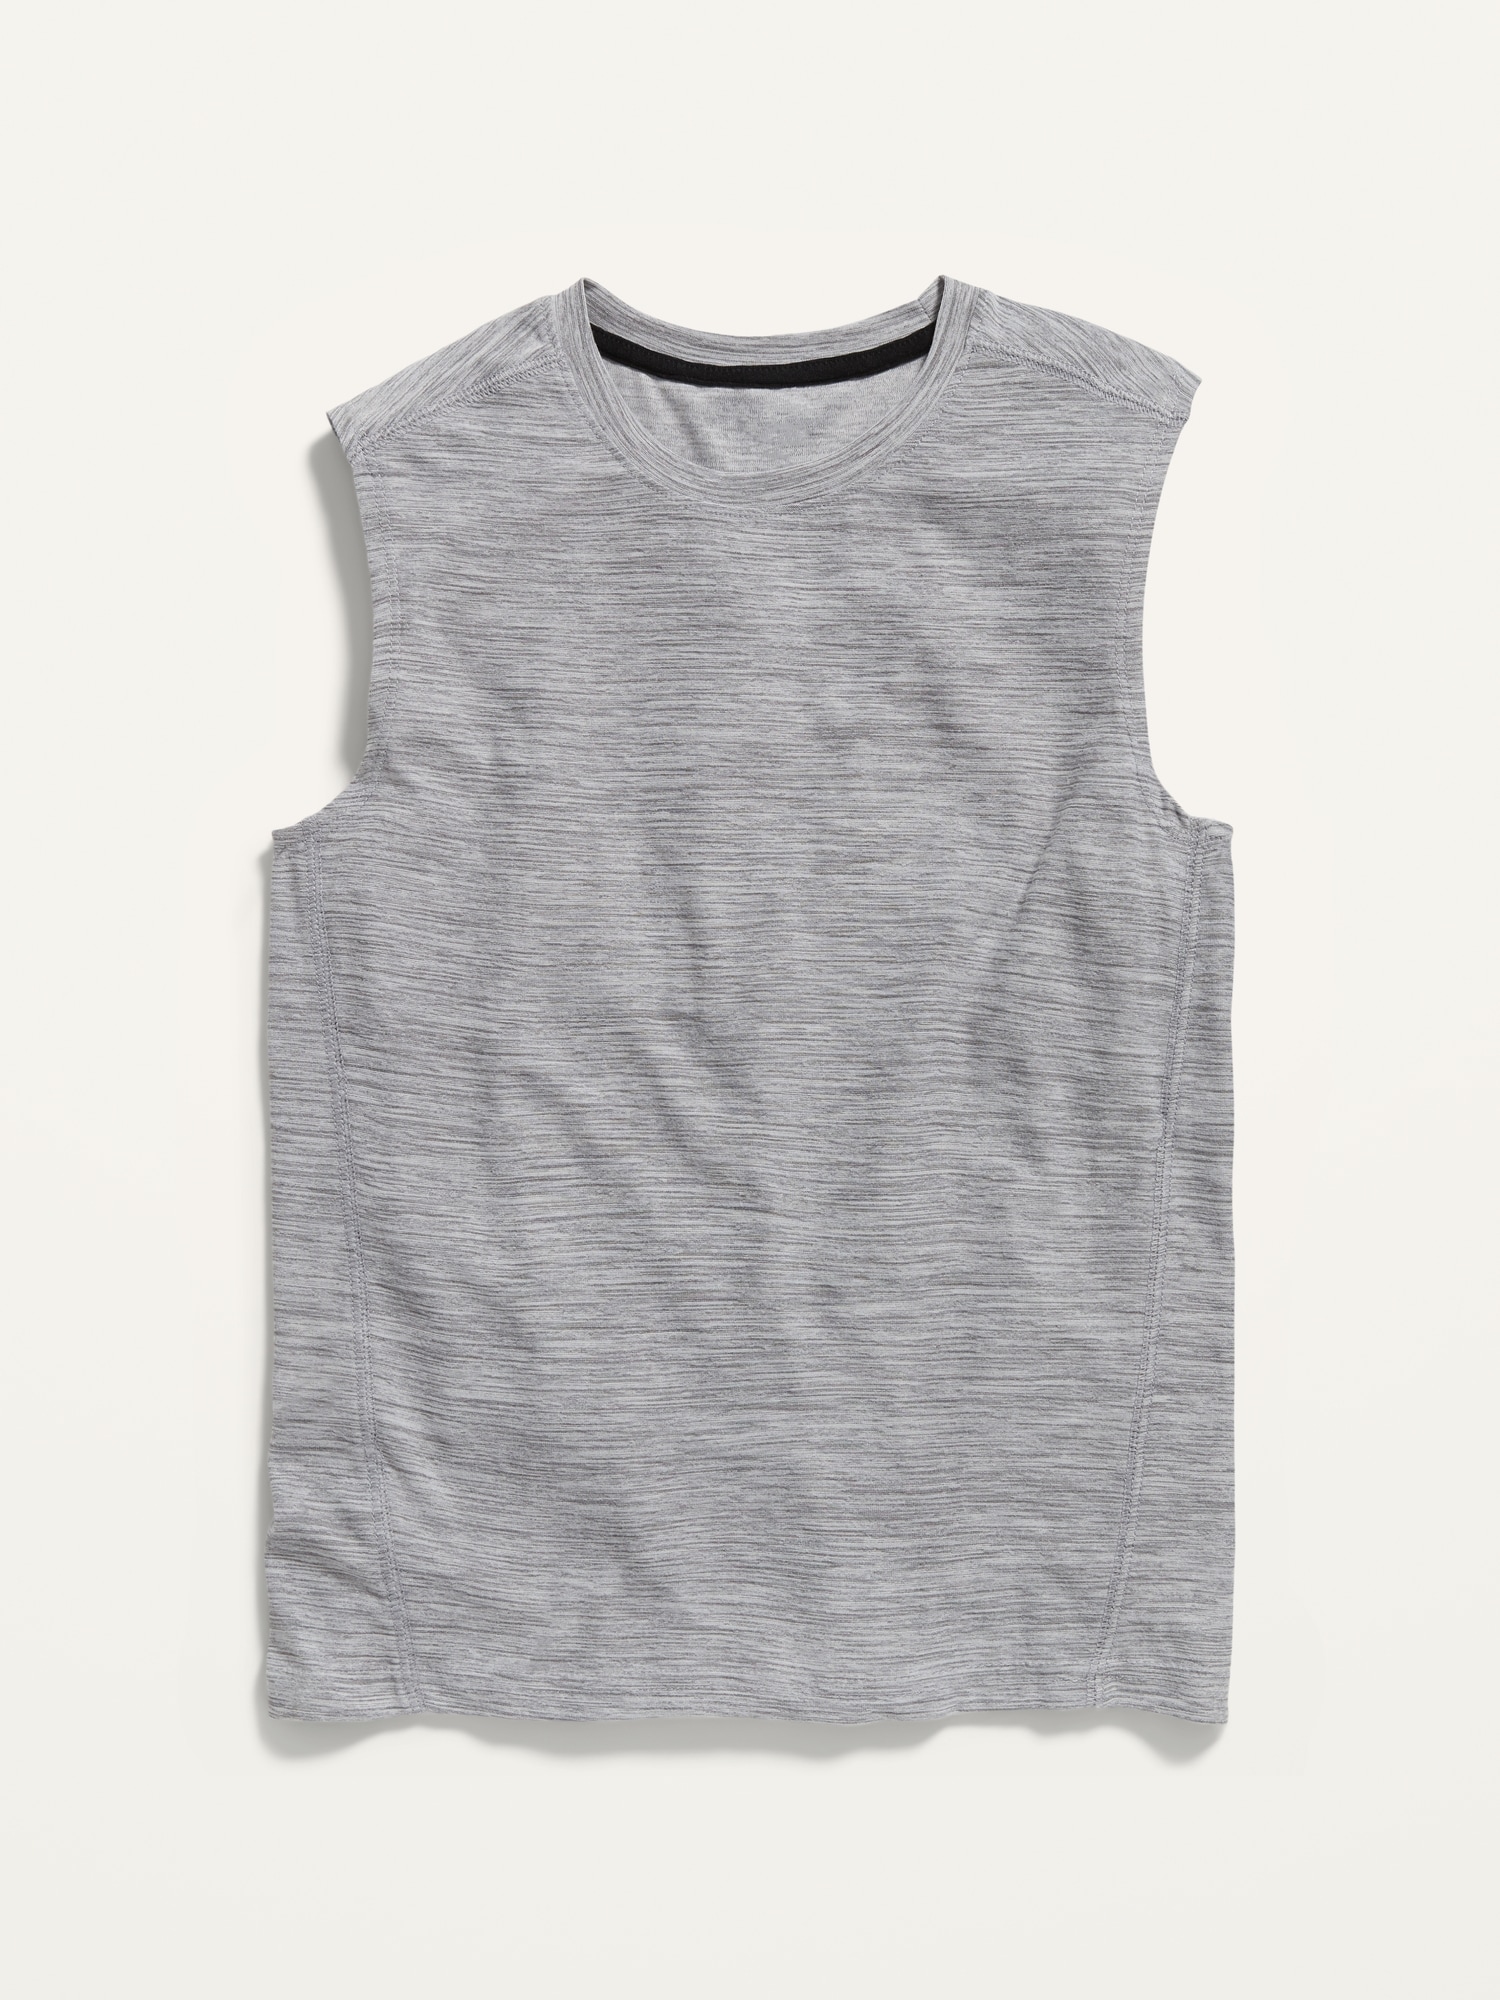 Breathe ON Performance Tank Top for Boys | Old Navy